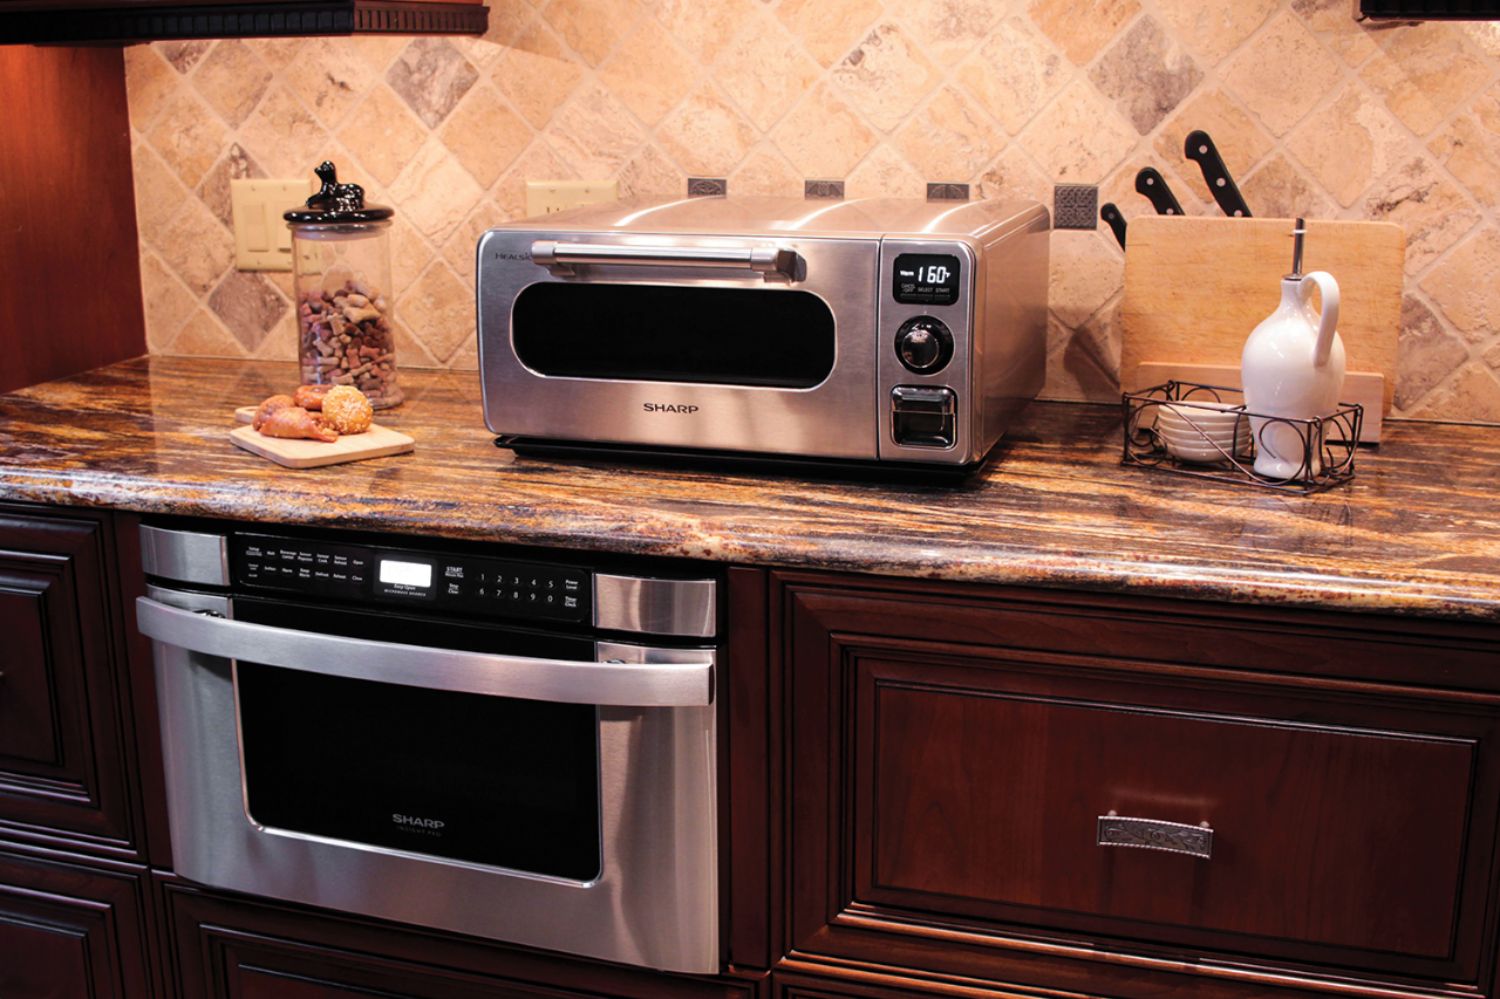 Sharp Superheated Steam Countertop Oven (Review) (Model: SSC0586DS